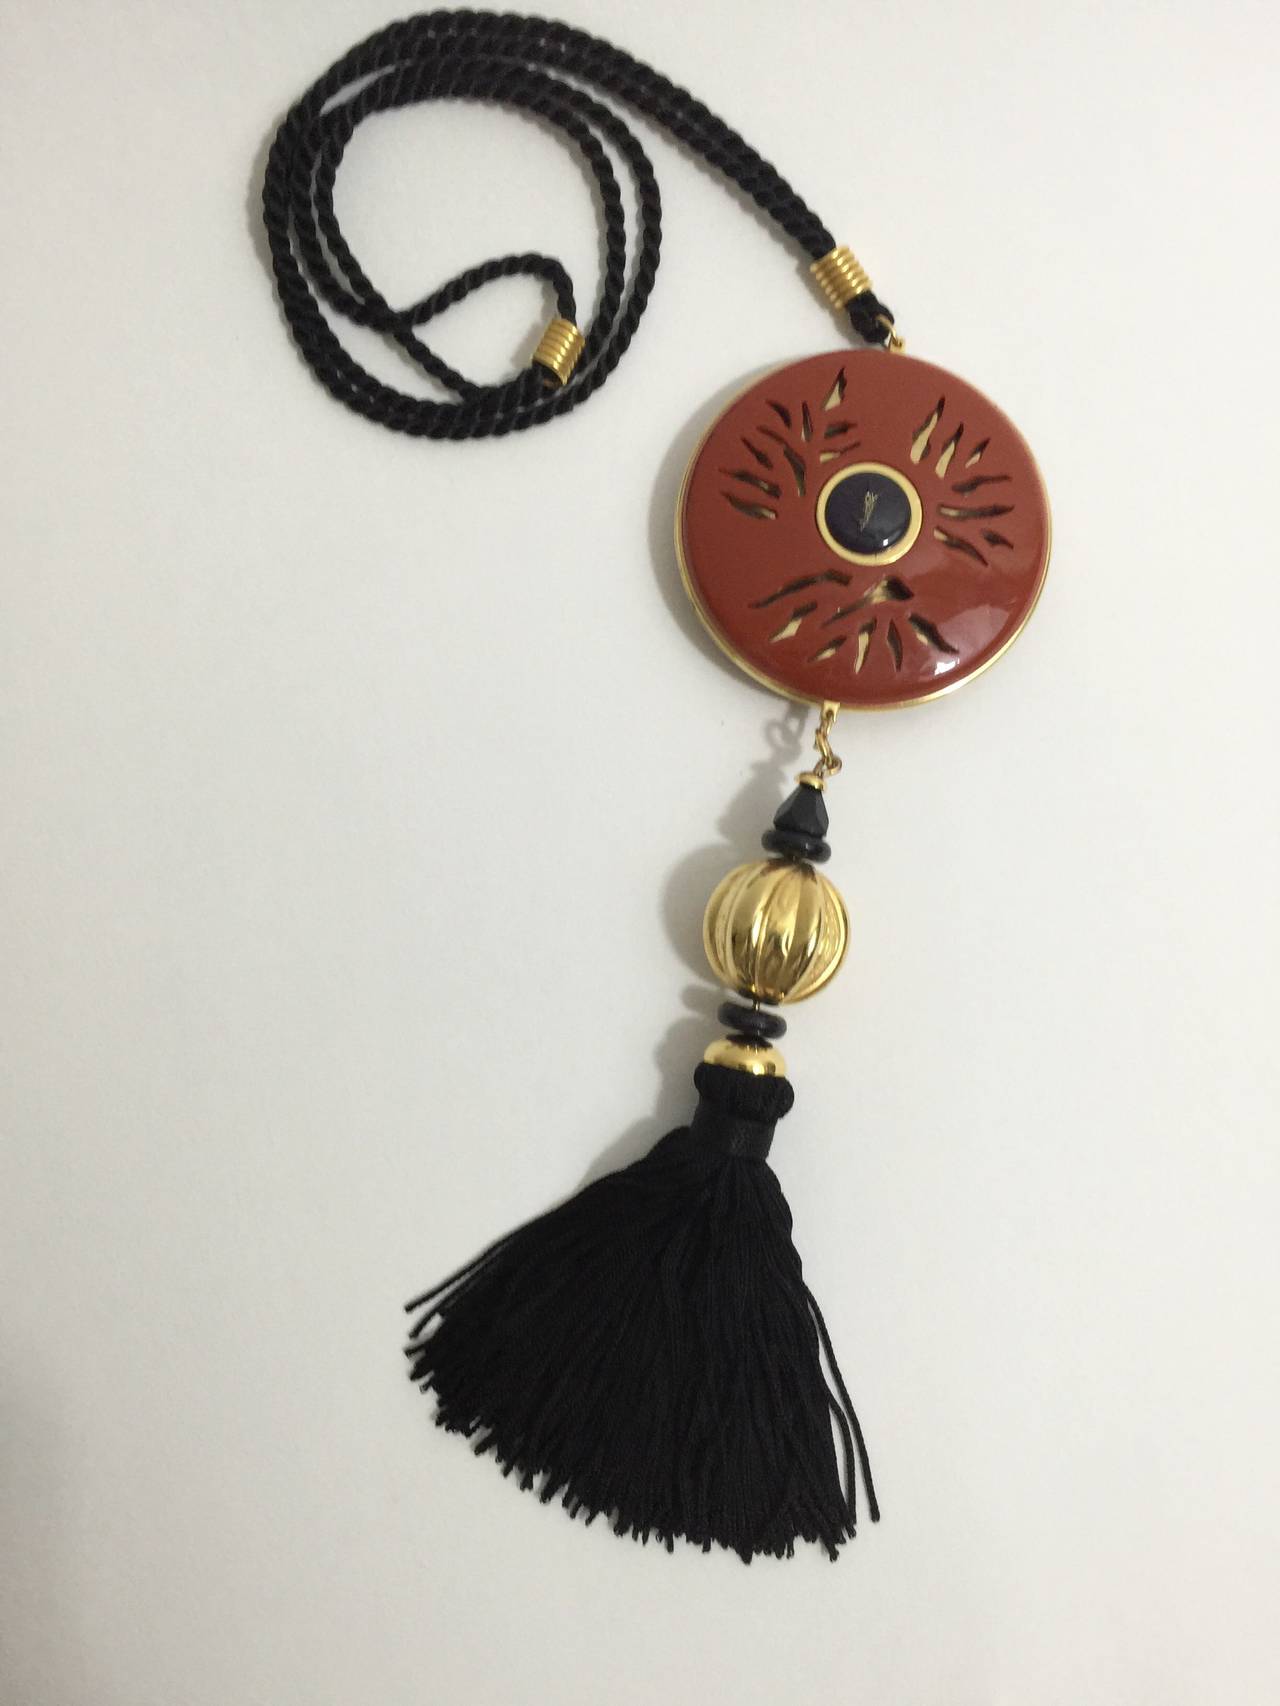 This Vintage YSL Opium Tassel Necklace is beautiful and collectible.  
Opium perfume was first released in 1977, and the opium necklaces have been discontinued since the mid-1980's. 
A deep orange disc pendant with open work detailing and YSL stamp